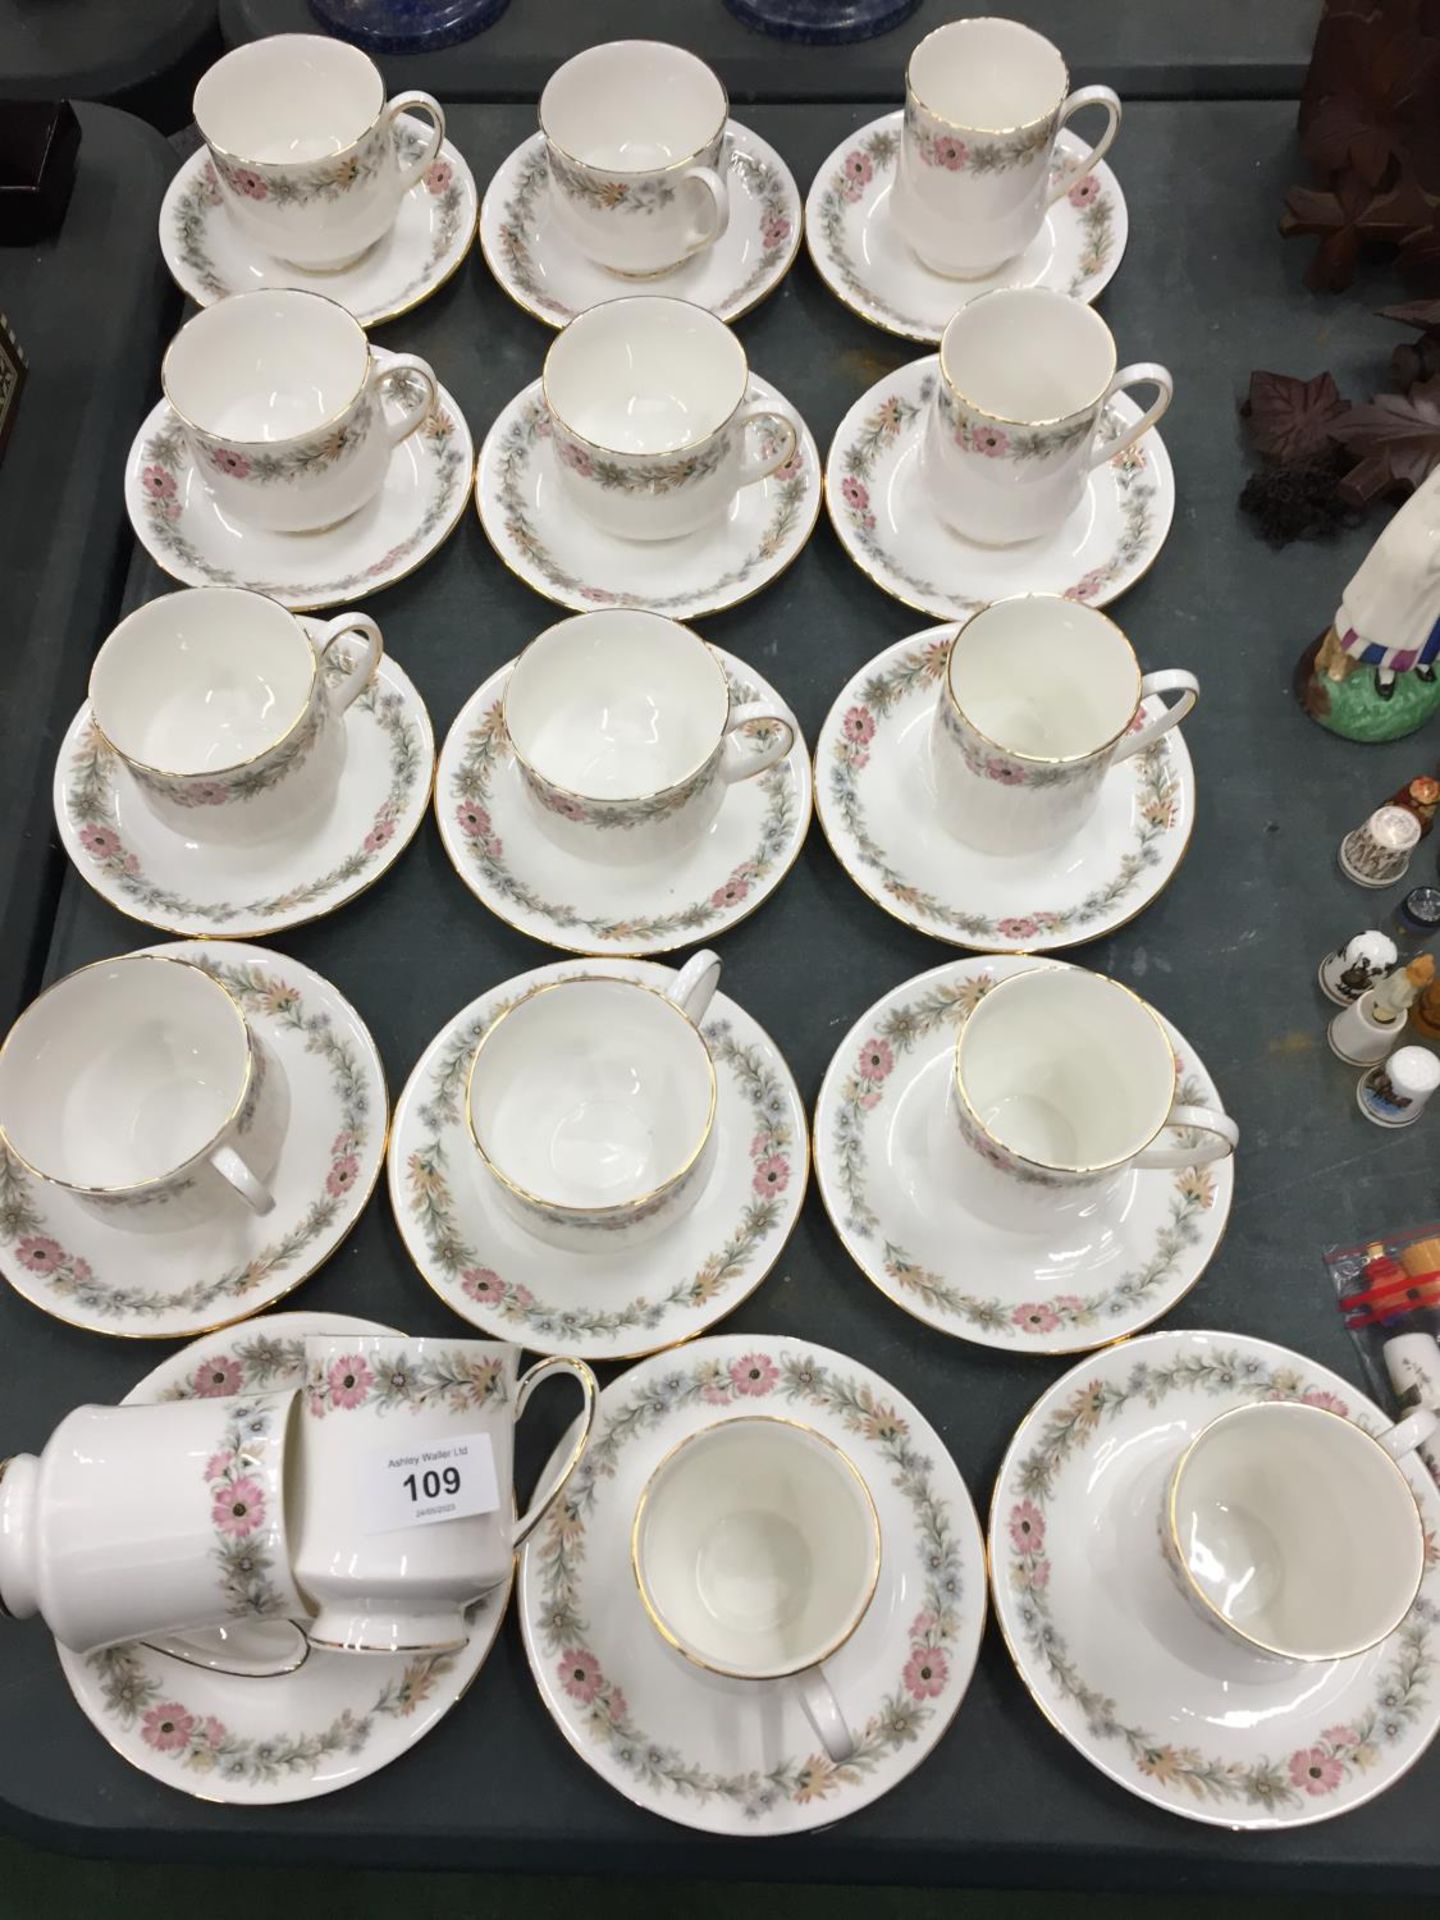 A LARGE QUANTITY OF ROYAL ALBERT 'BELINDA' CUPS AND SAUCERS